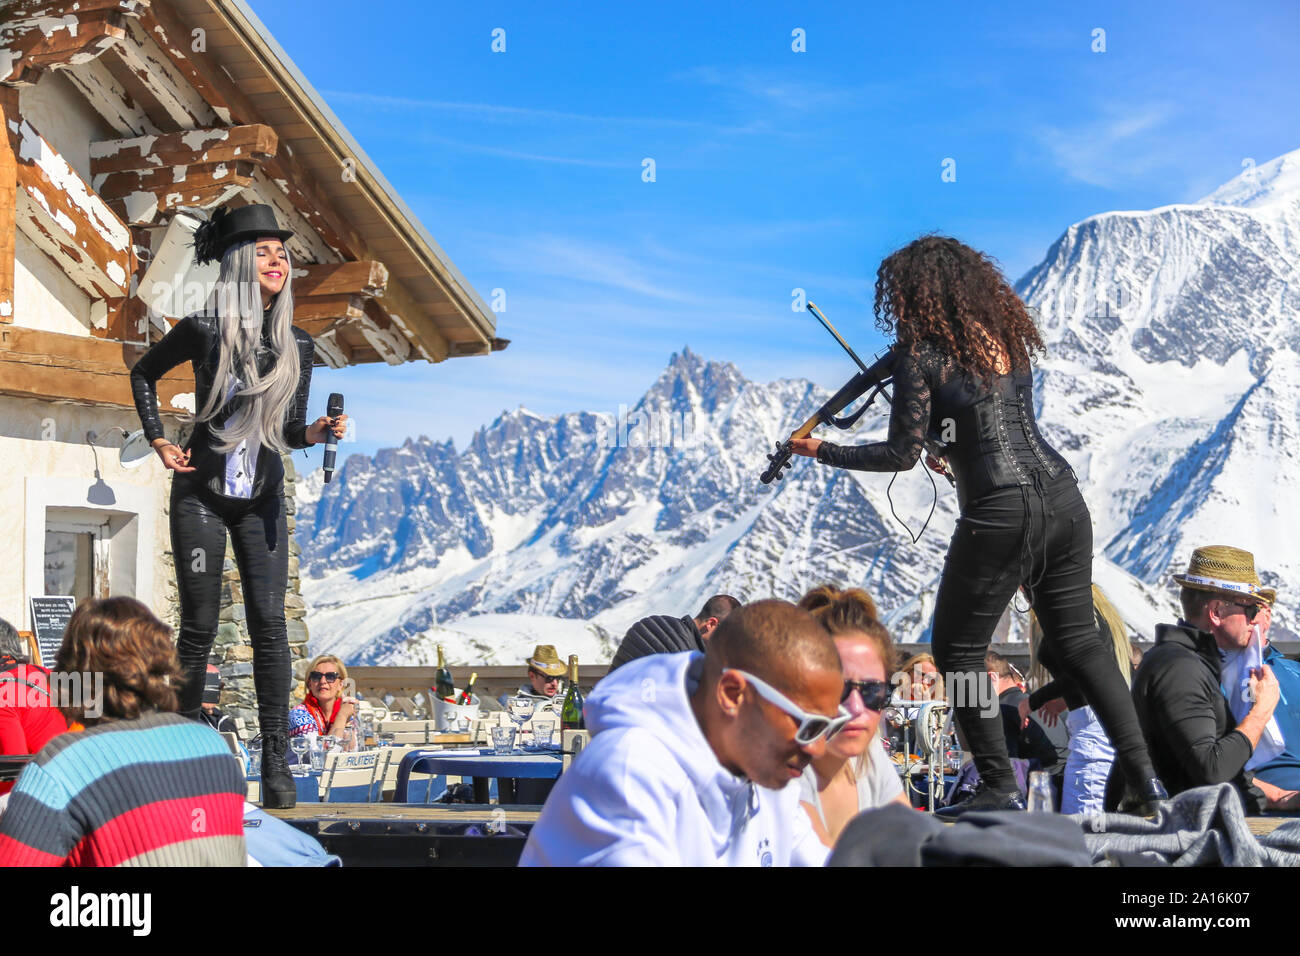 Artists perform in an after ski event, with snow capped Mont Blanc